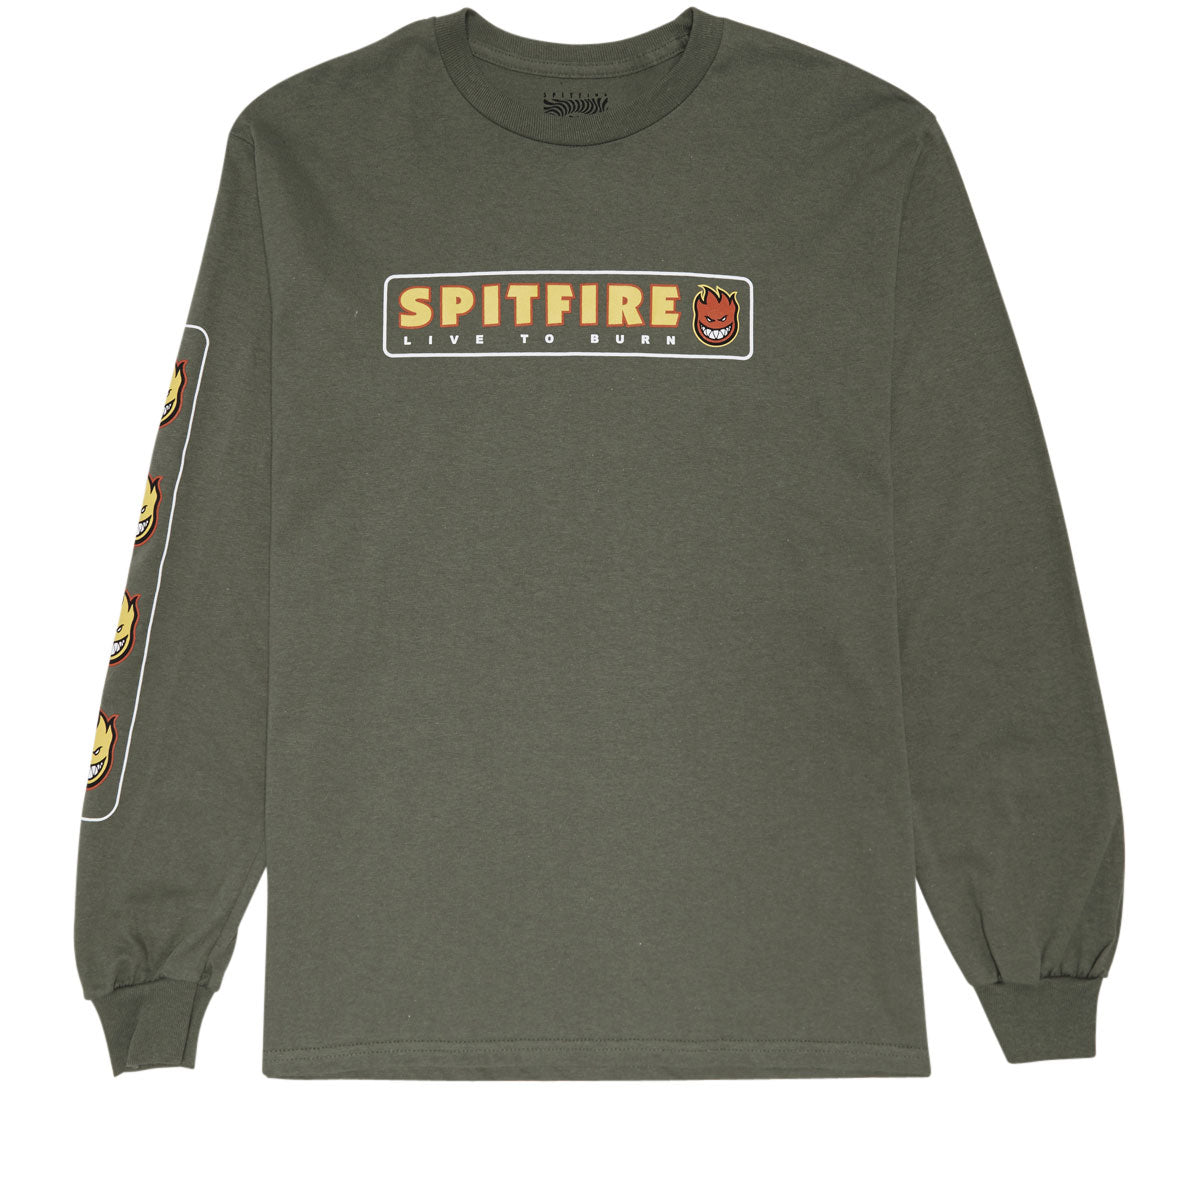 Spitfire LTB Long Sleeve Sleeve T-Shirt - Military Green image 1